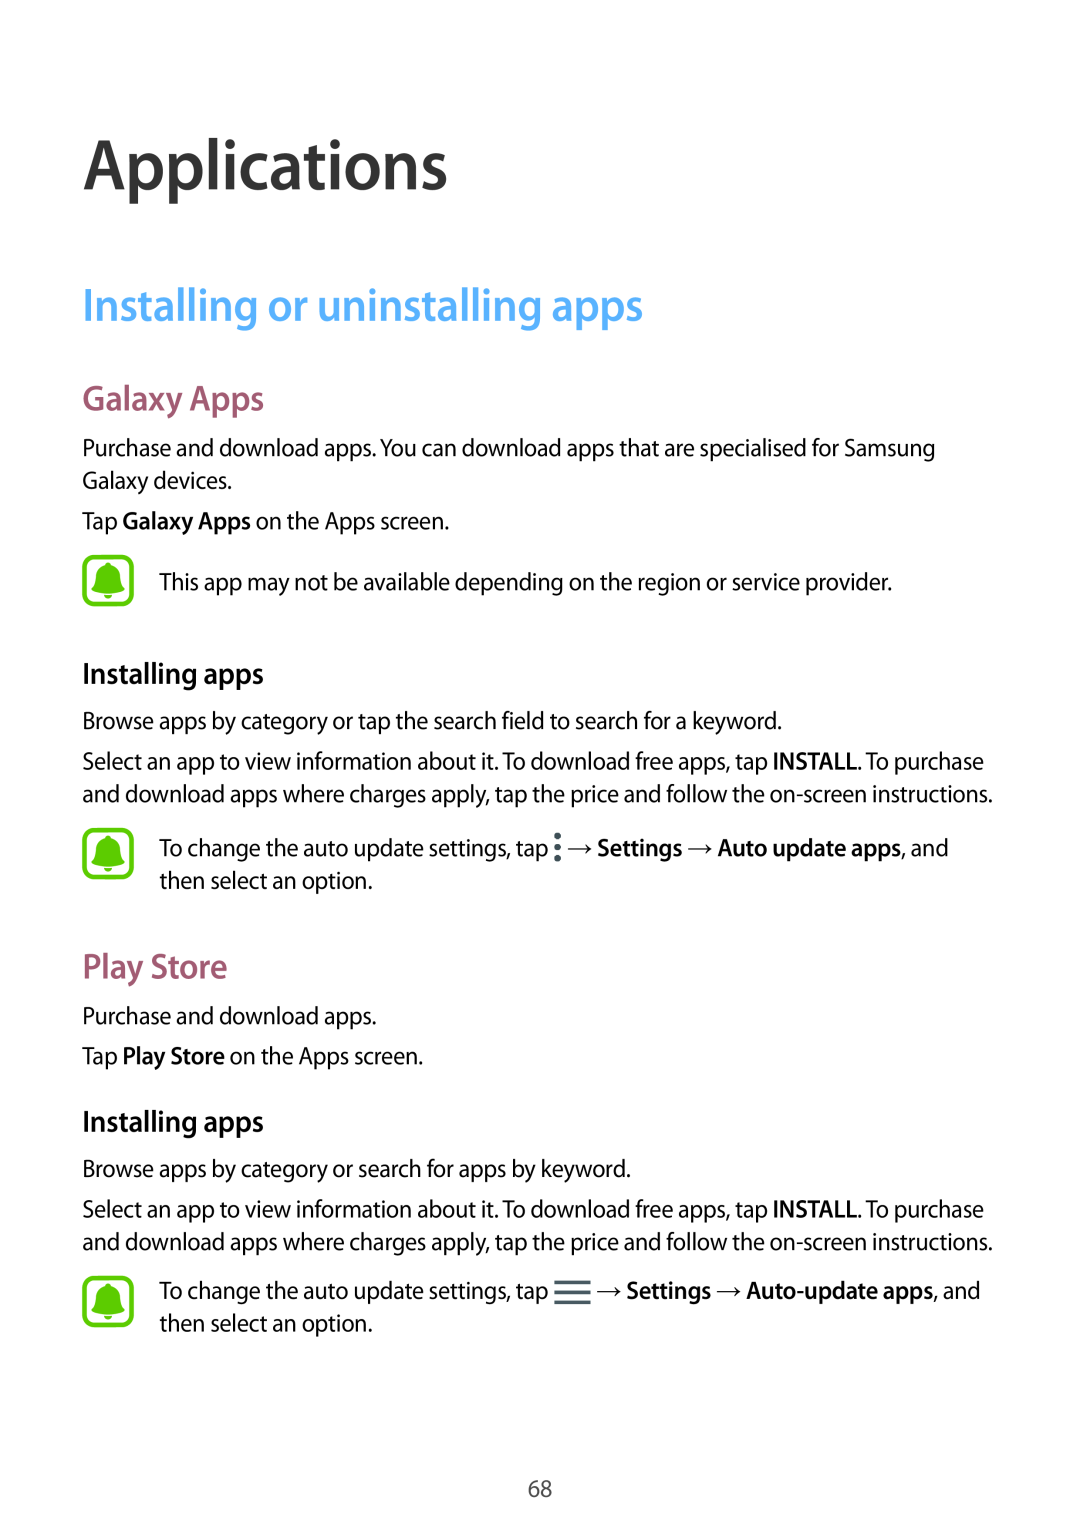 Samsung SM-G925XZWAXXV manual Applications, Installing or uninstalling apps, Galaxy Apps, Play Store, Installing apps 